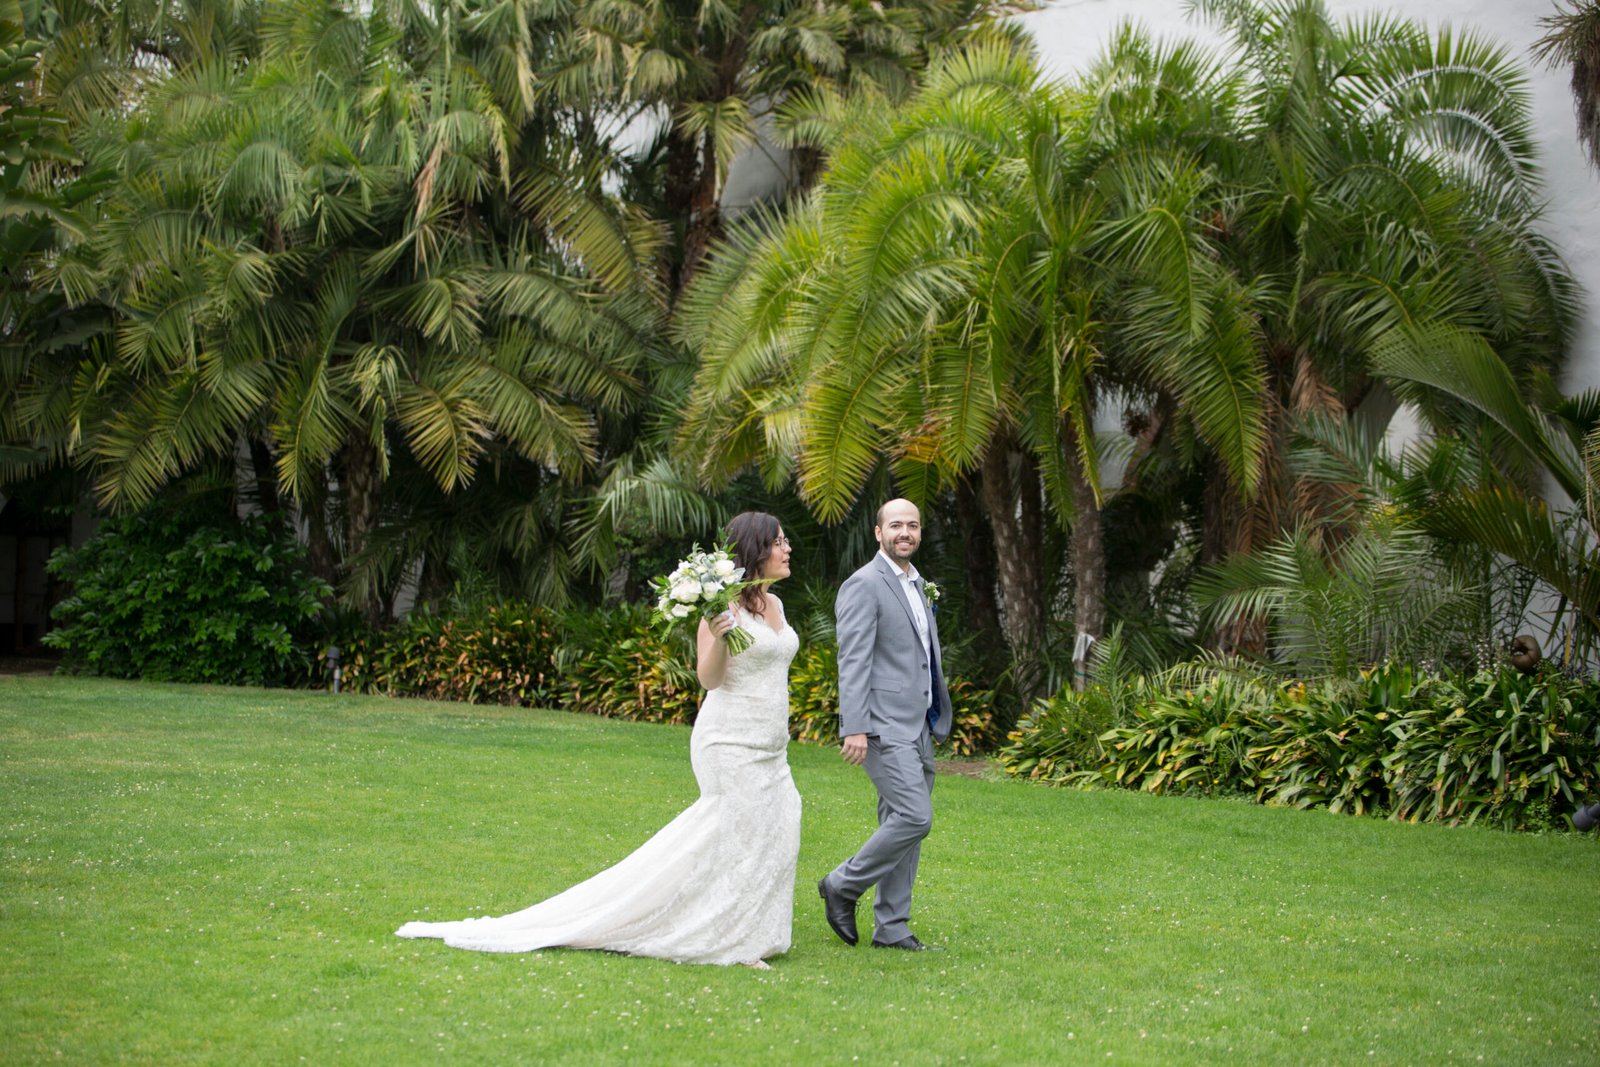 Bride and groom walking along the grass with palm trees behind them at the Santa Barbara Courthouse